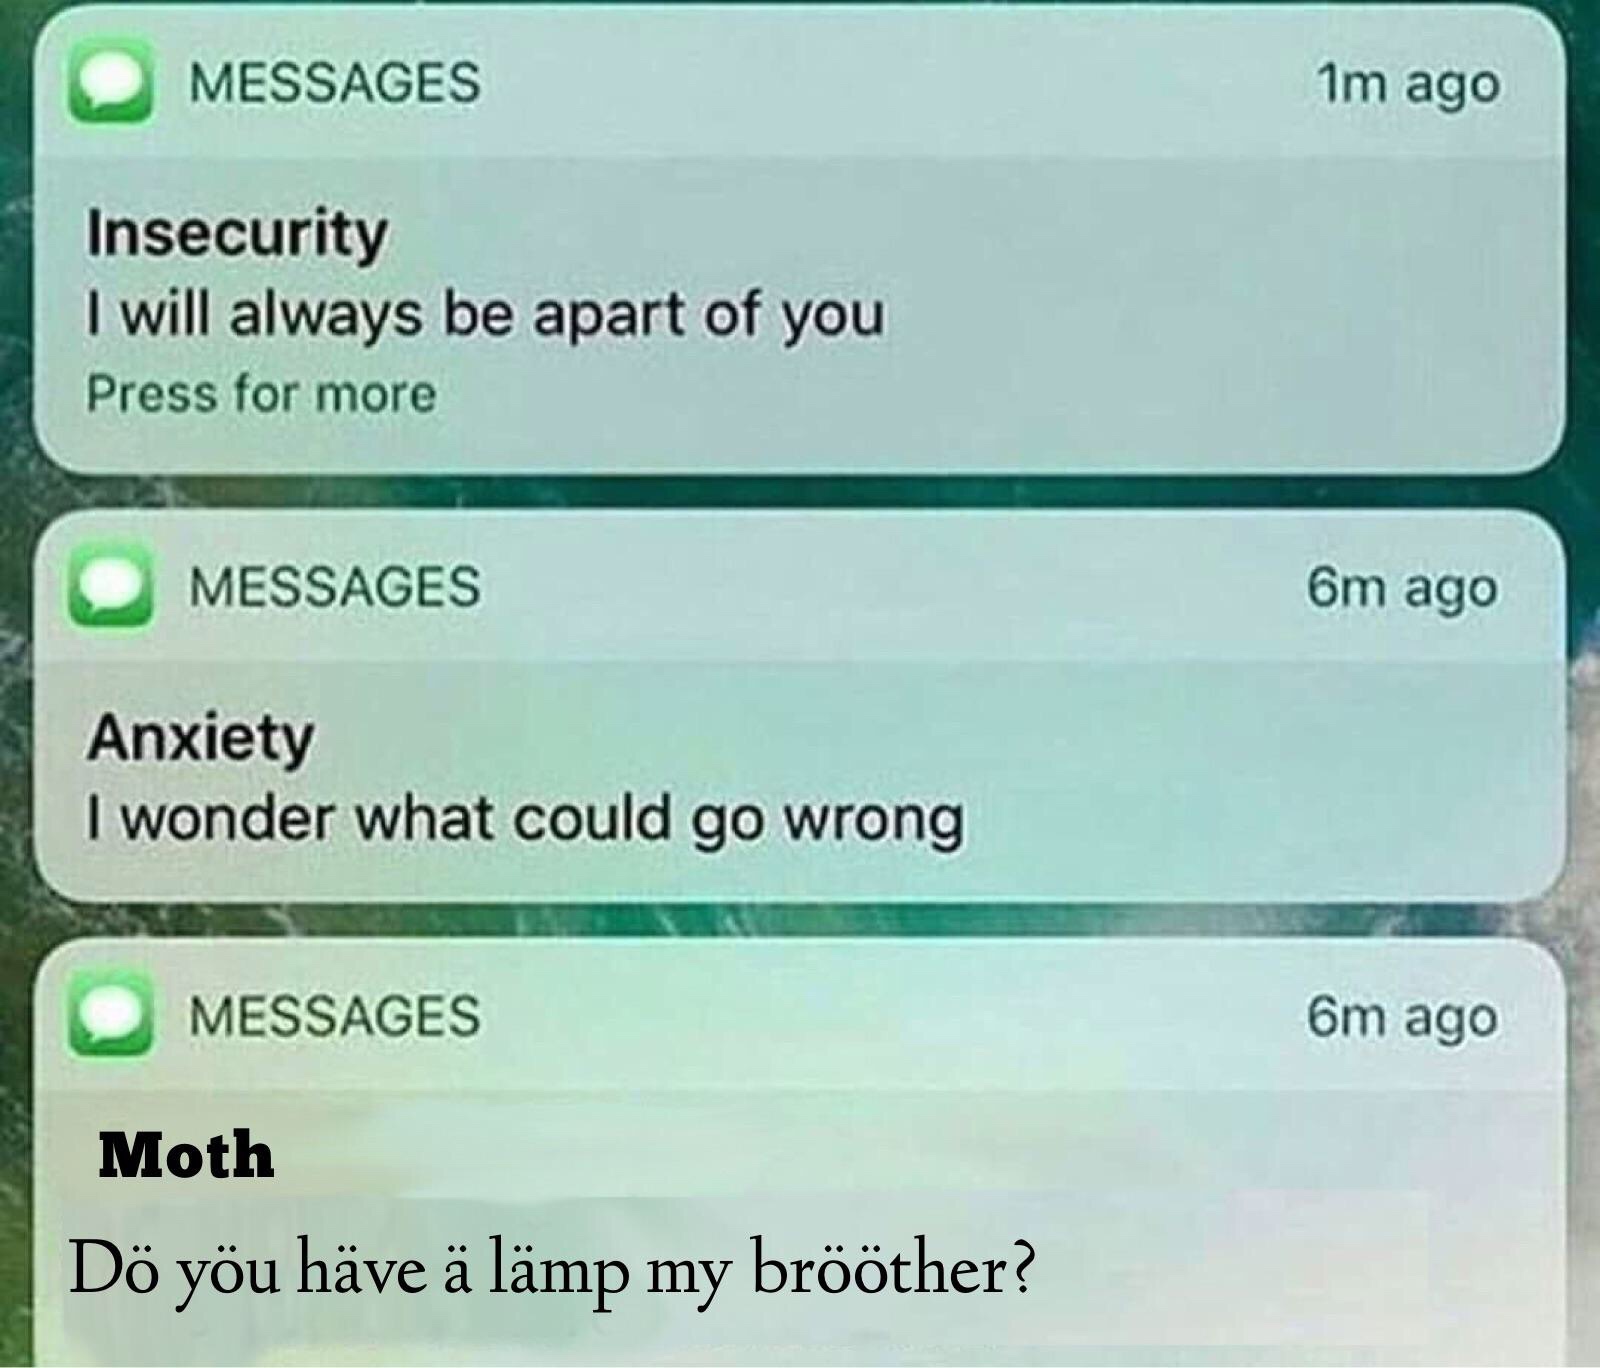 moth memes - Messages 1m ago Insecurity I will always be apart of you Press for more Messages 6m ago Anxiety I wonder what could go wrong 6m ago Messages Moth D you have lmp my brther?